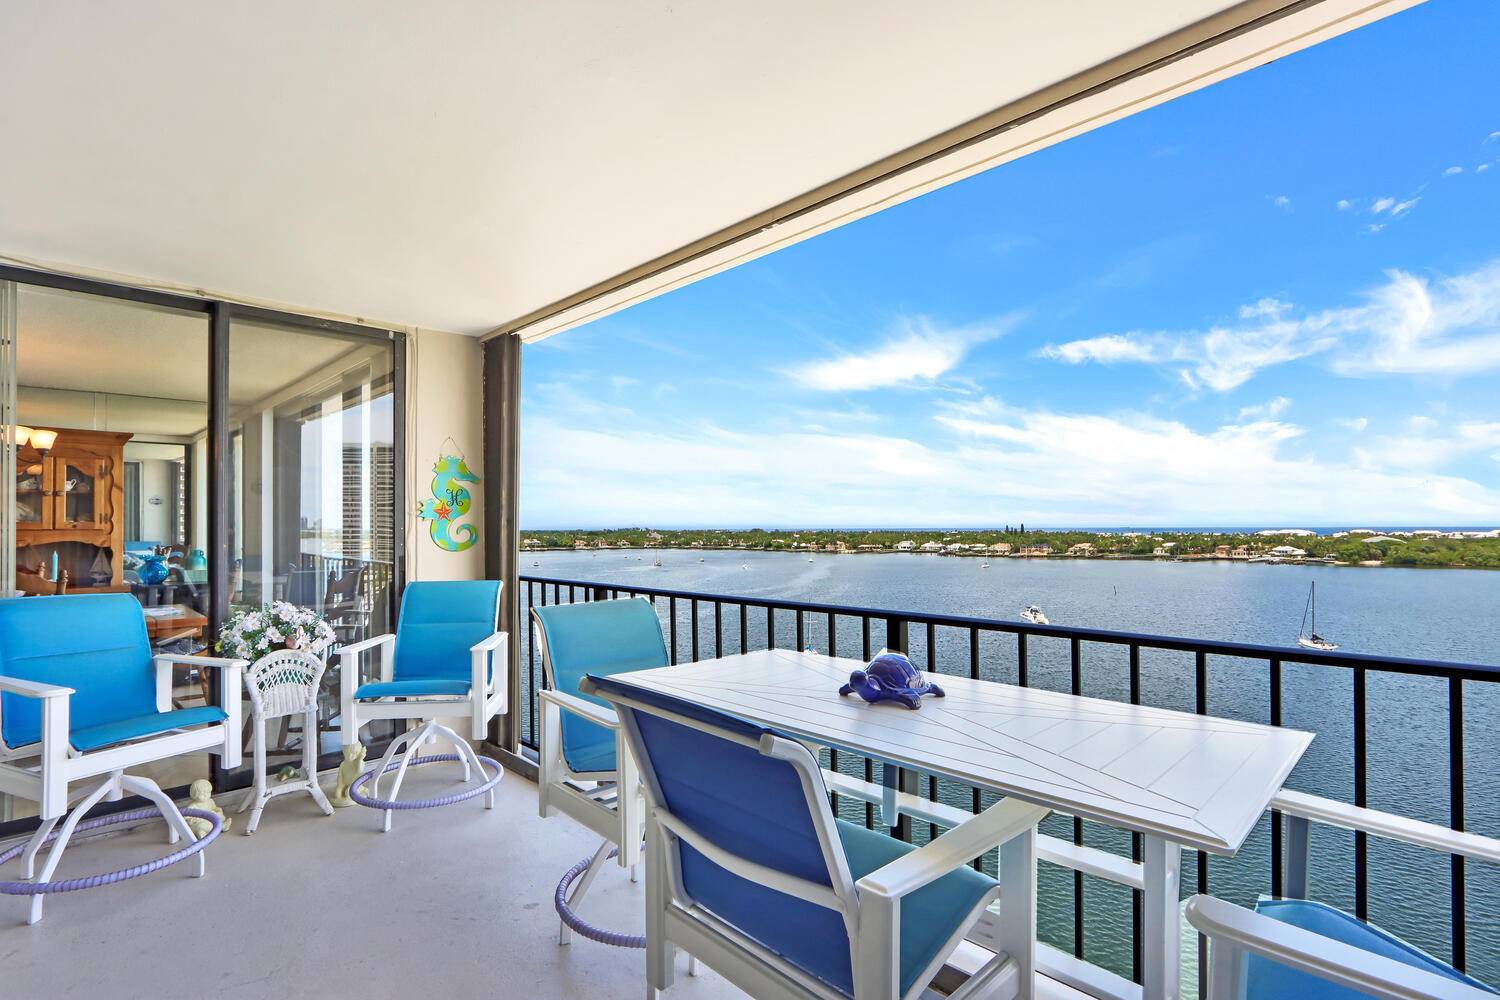 A special opportunity to live on the Water and View the Ocean and Little Lake Worth from your 11th floor Balcony everyday in a very private well cared for Gated ...